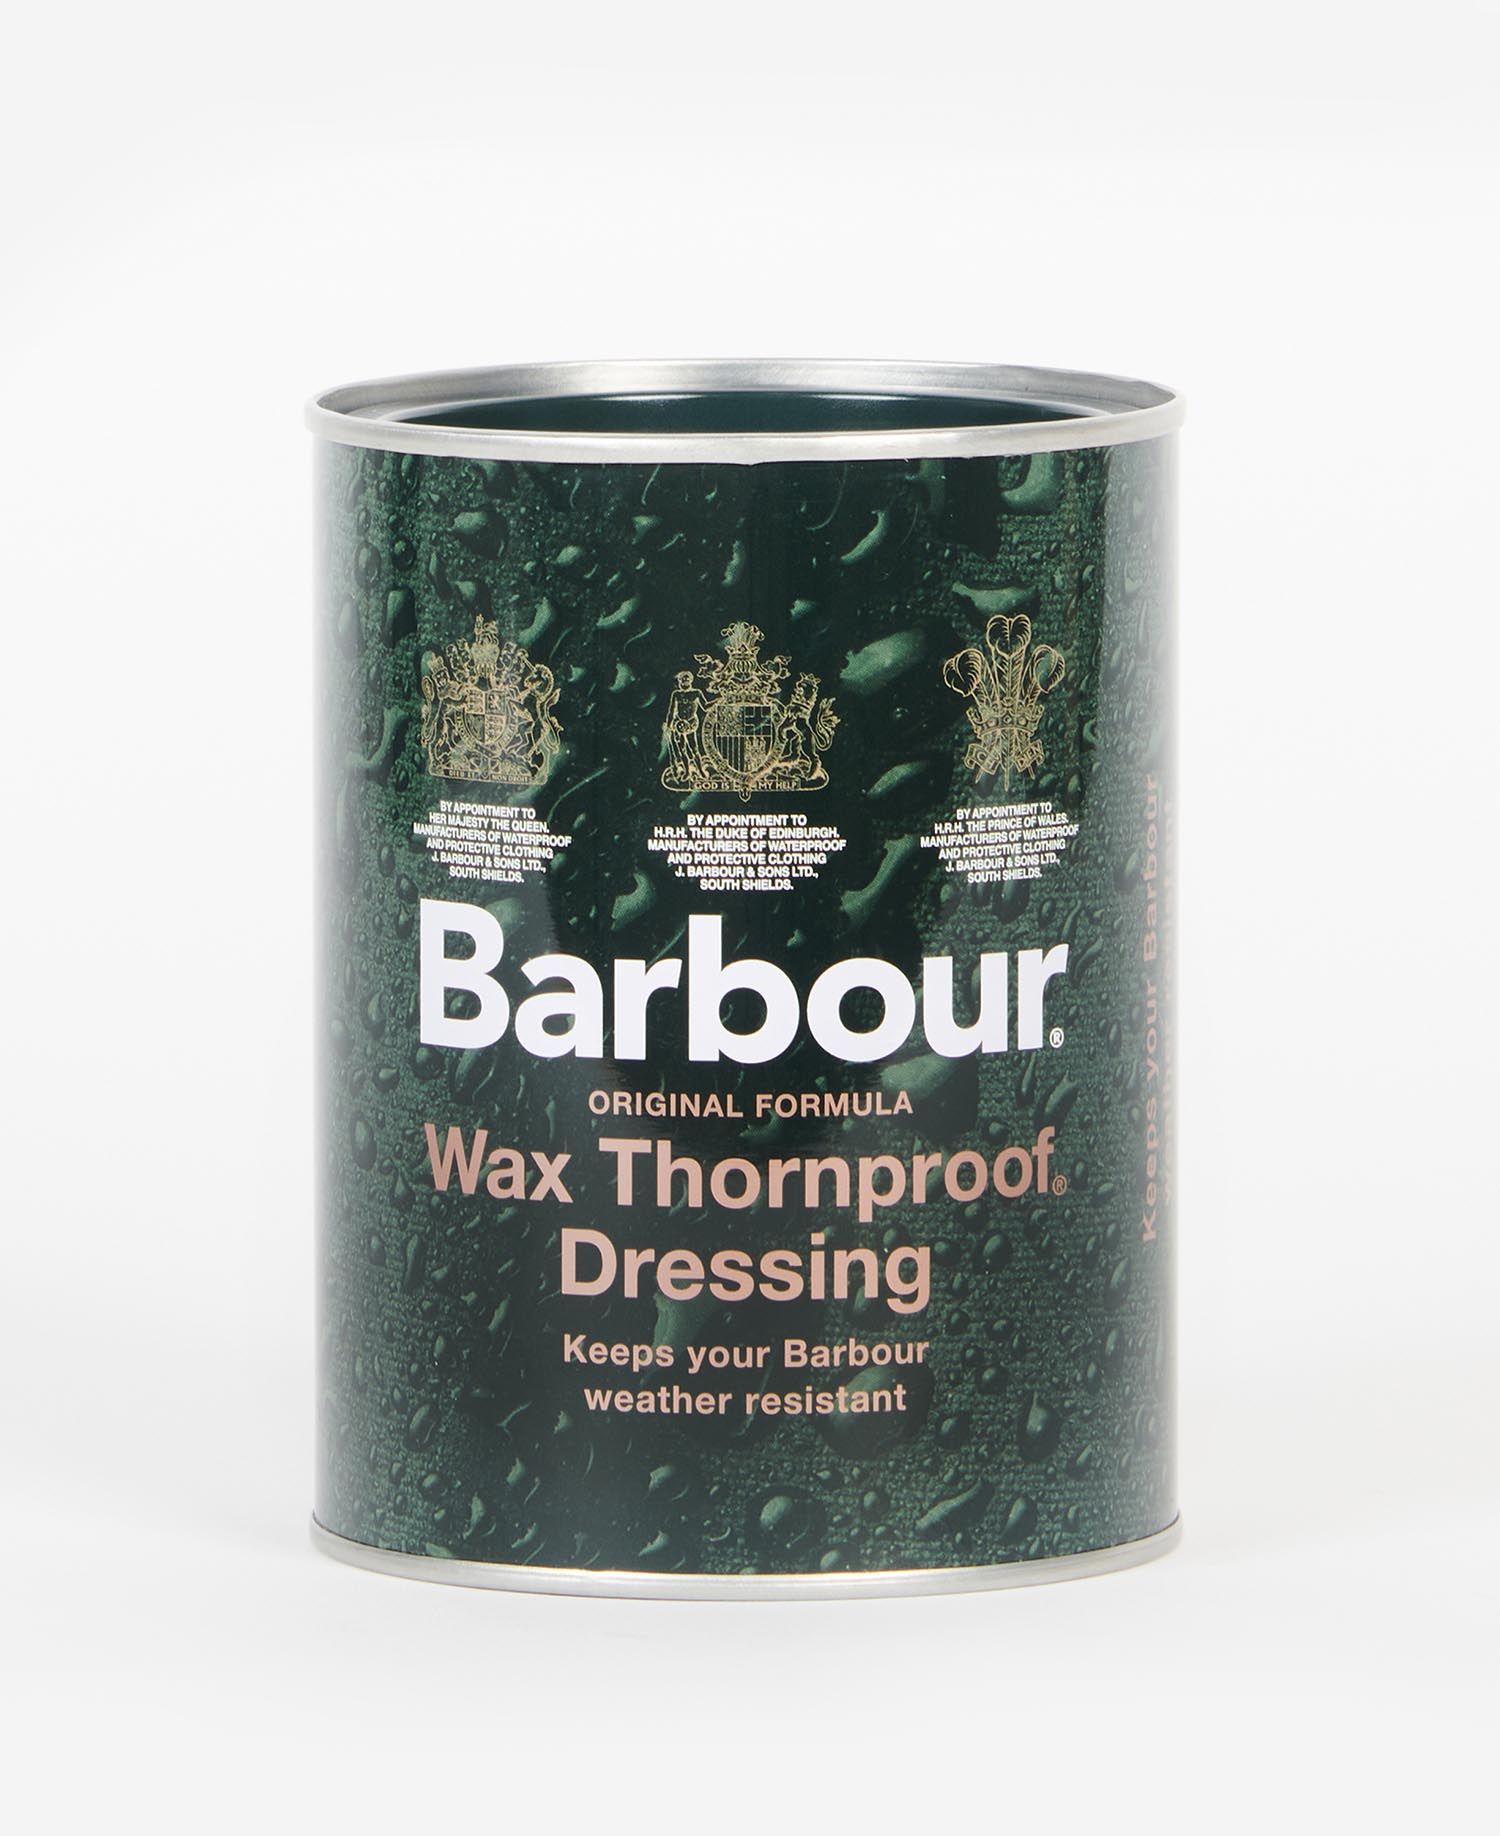 Barbour Family size Thornproof Dressing